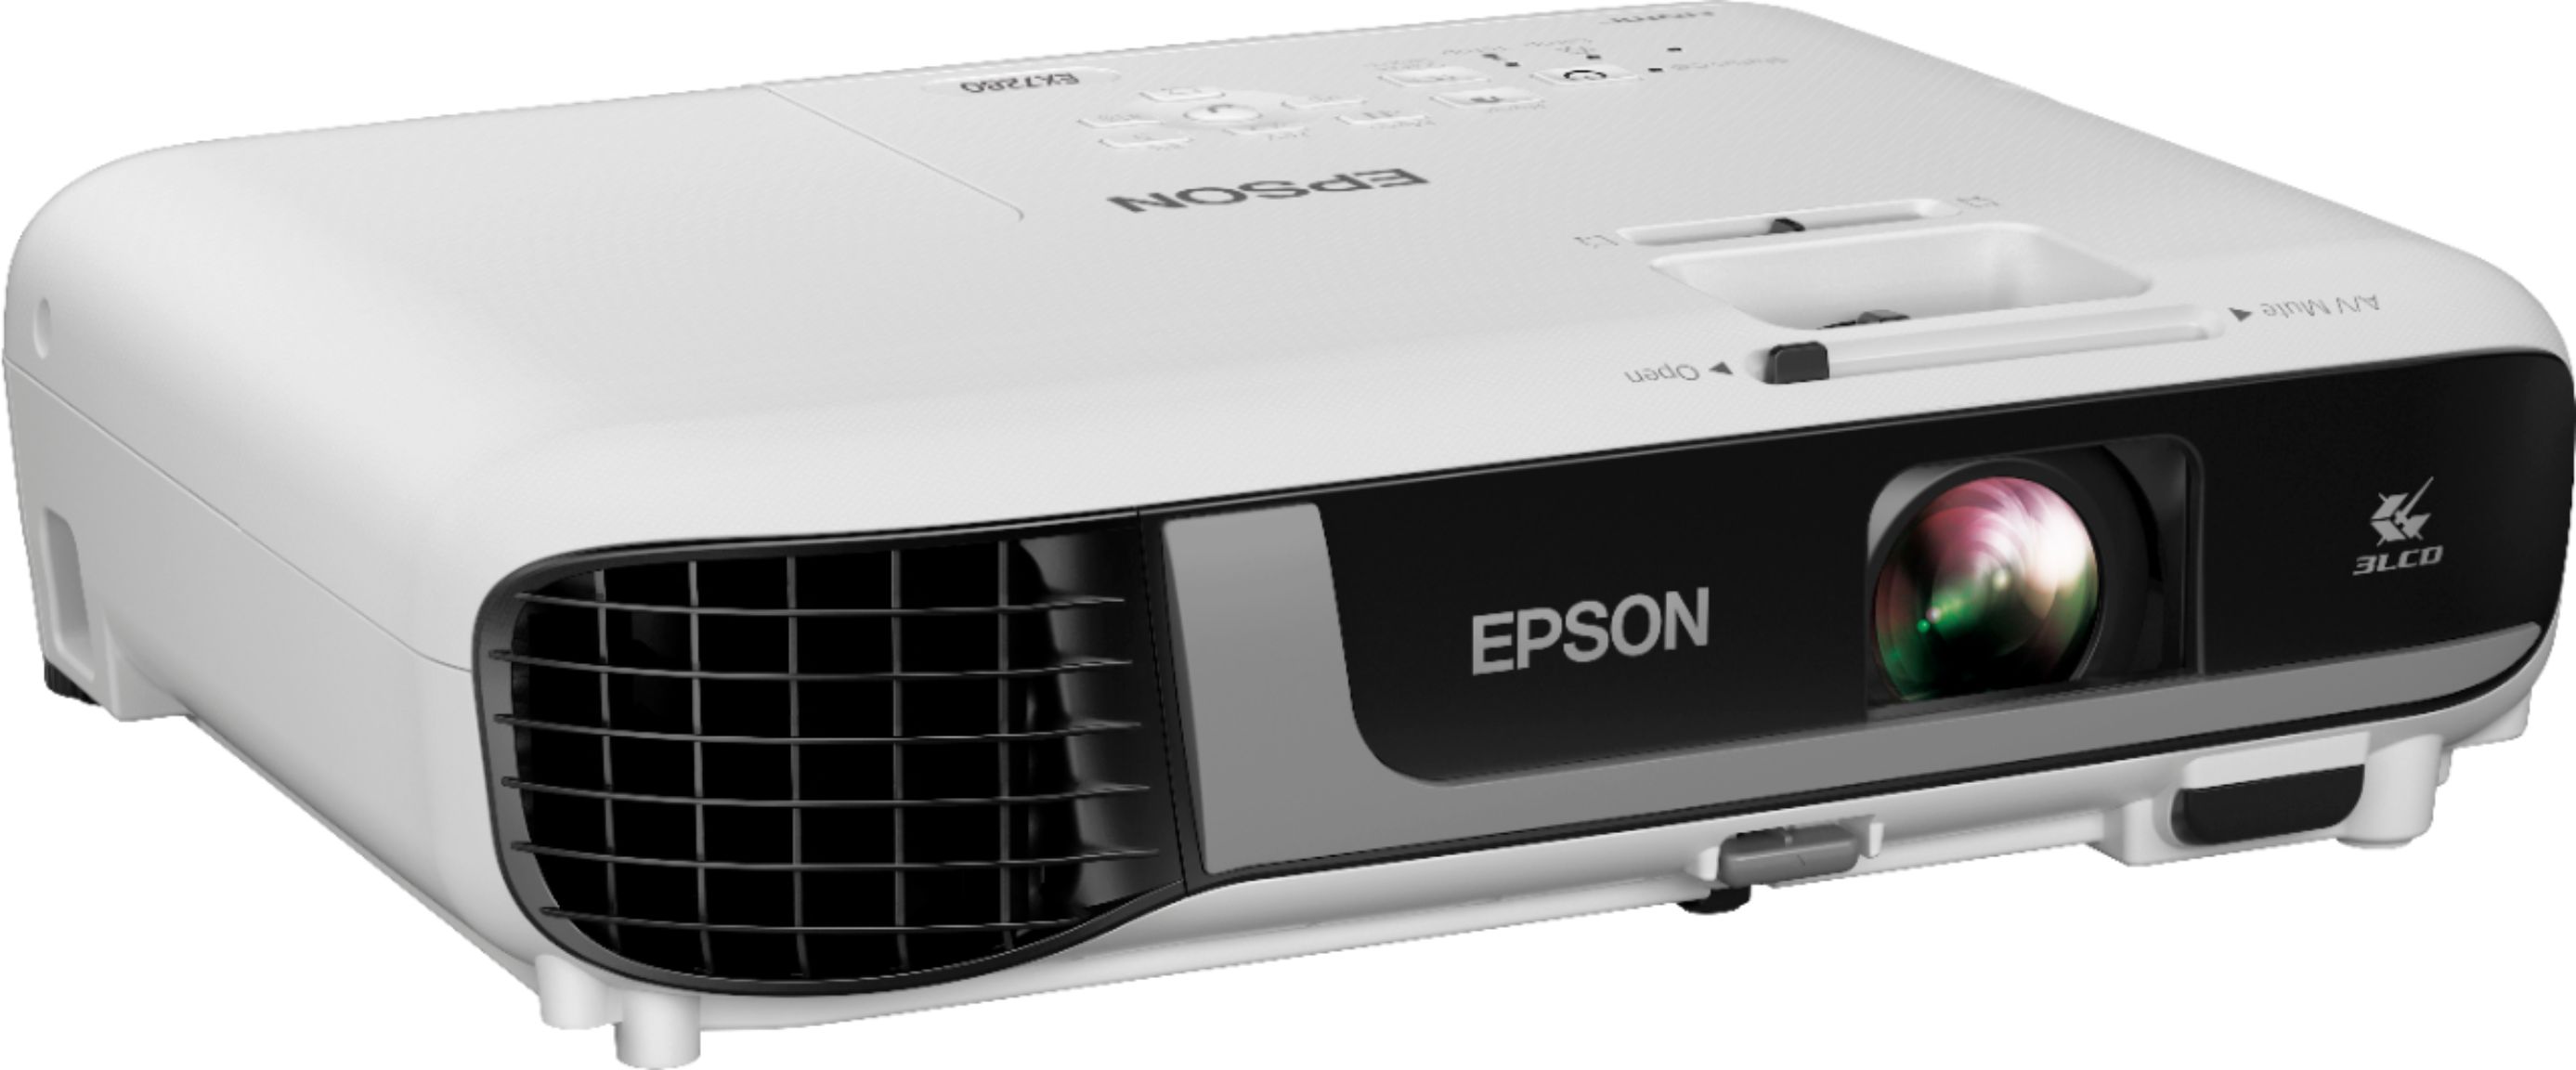 Projectors - Package Epson Home Cinema 2350 White and JBL